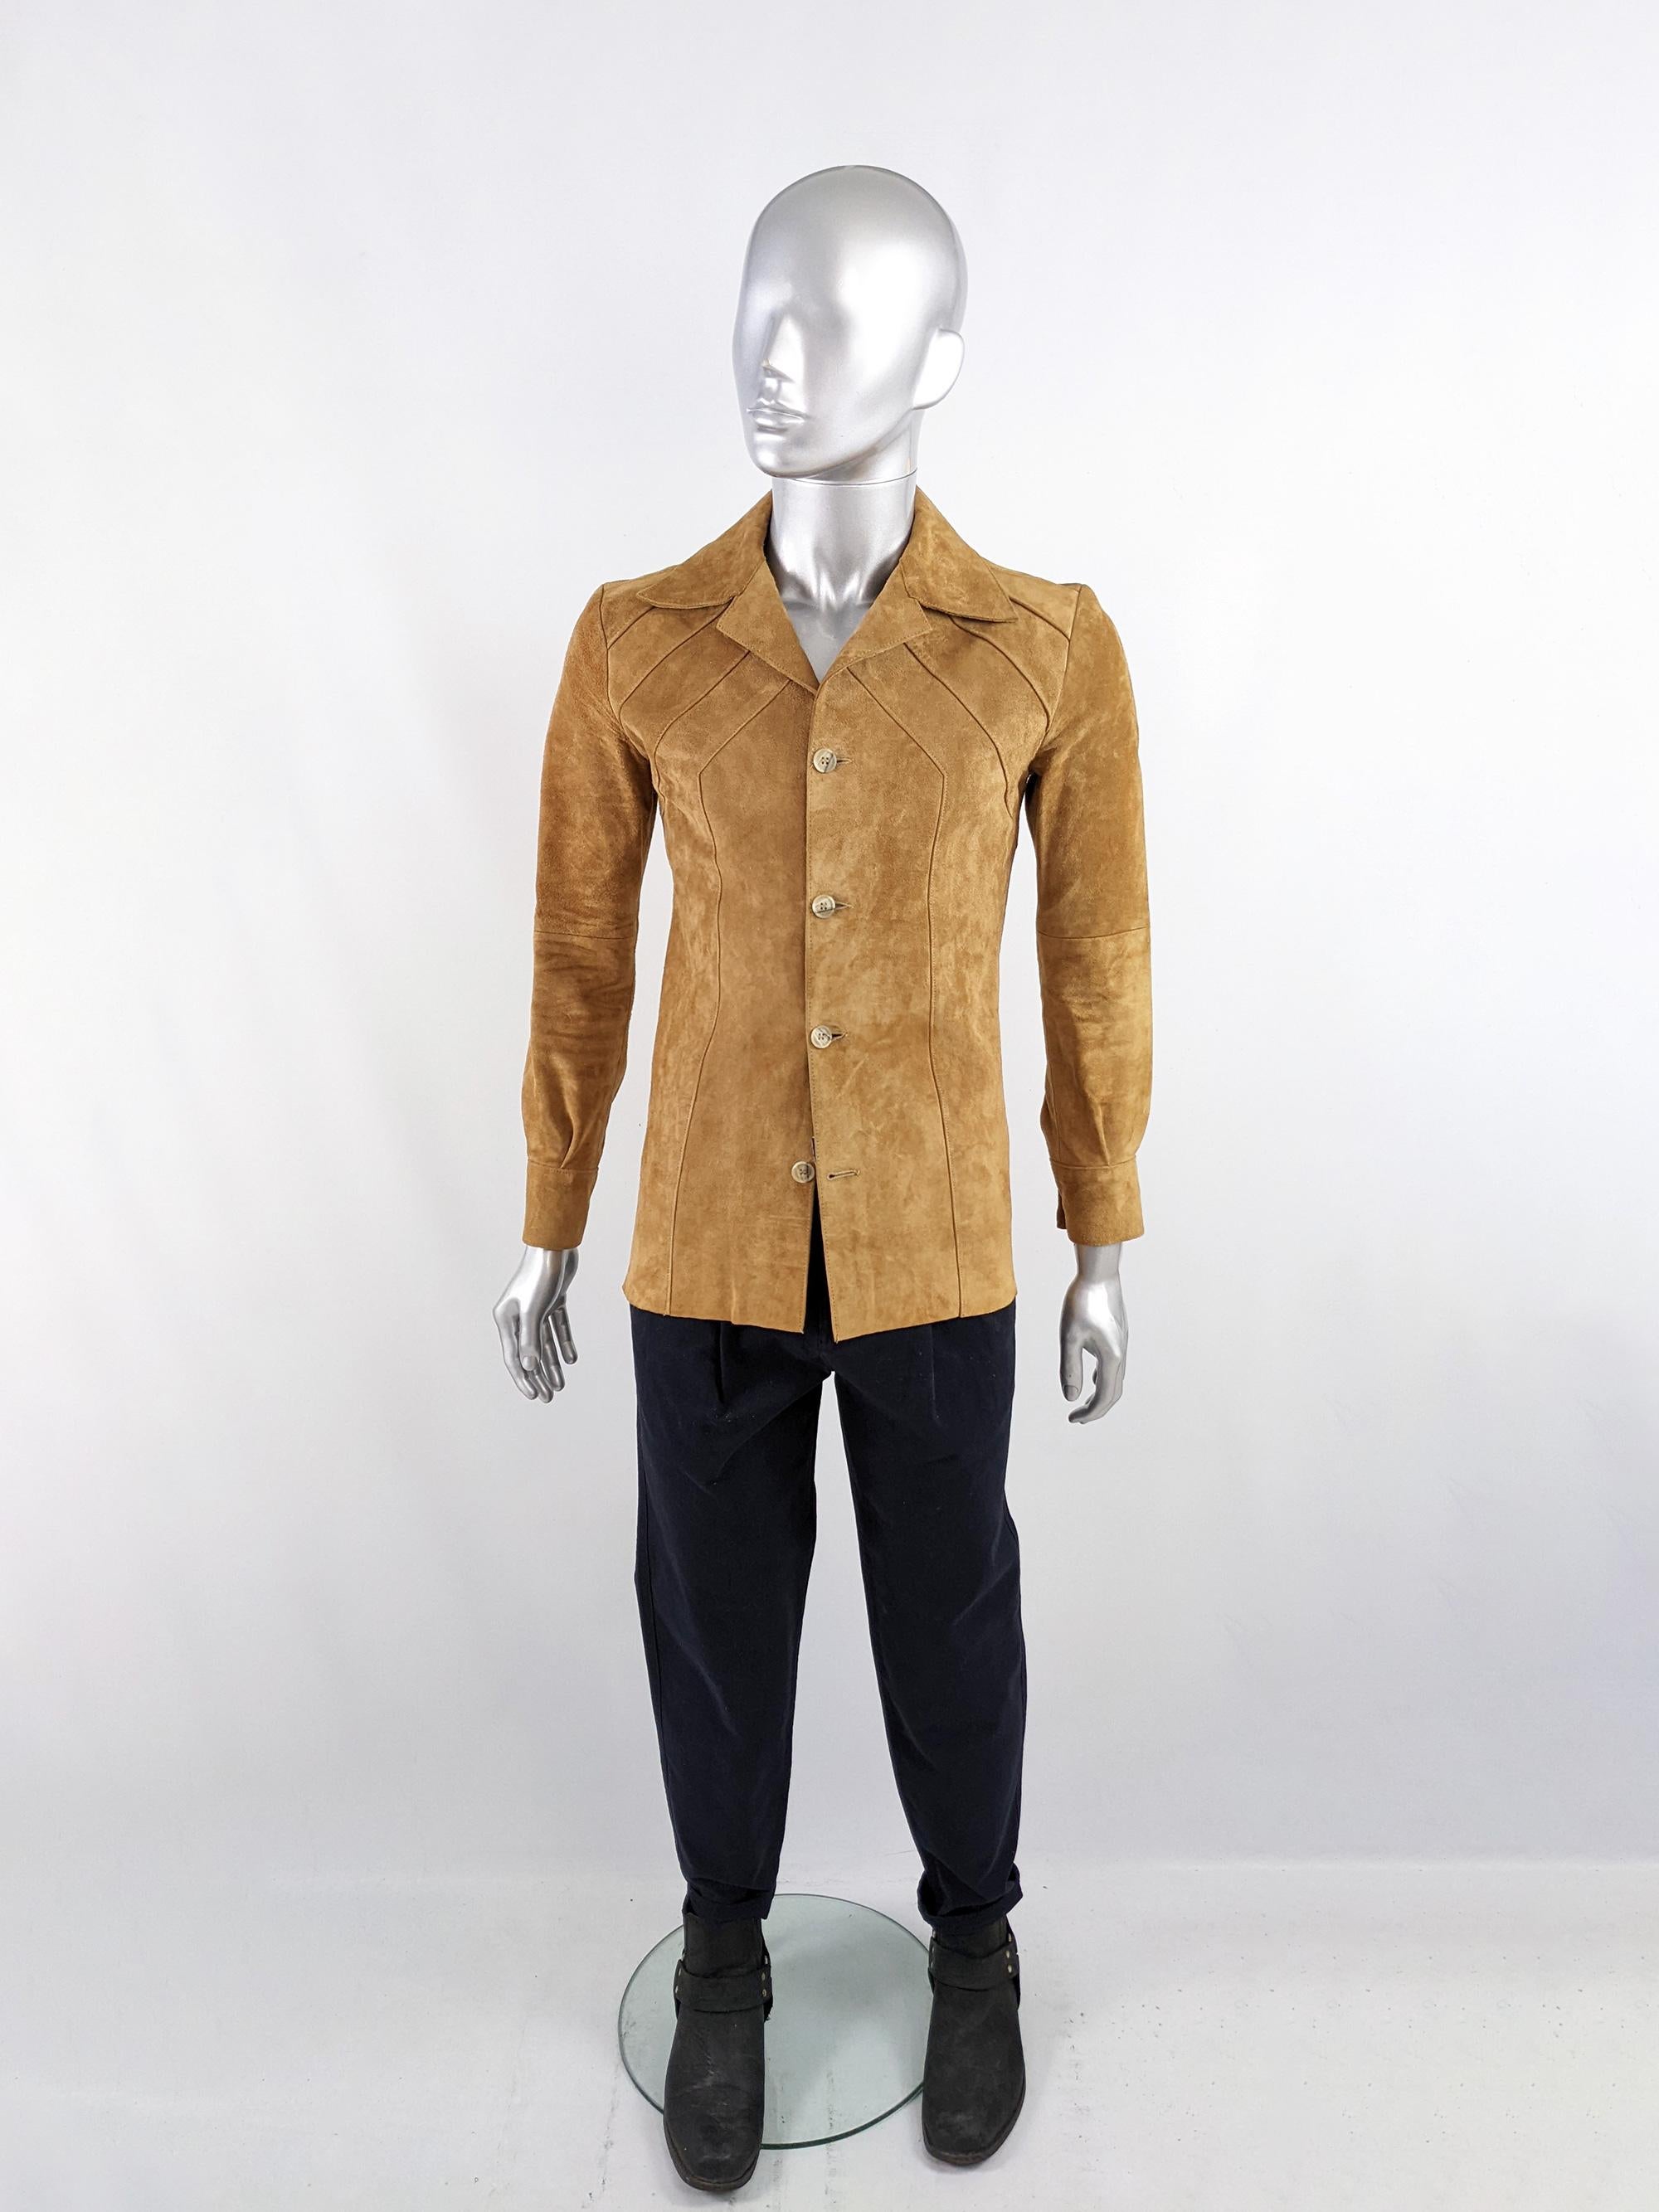 An incredible and rare vintage jacket from the late 60s by iconic Carnaby Street boutique, Take Six. In a tan suede with a large collar, pintuck details on the front and a slim fit for the perfect late 1960s dandy look.

Size: Marked UK 36 but since